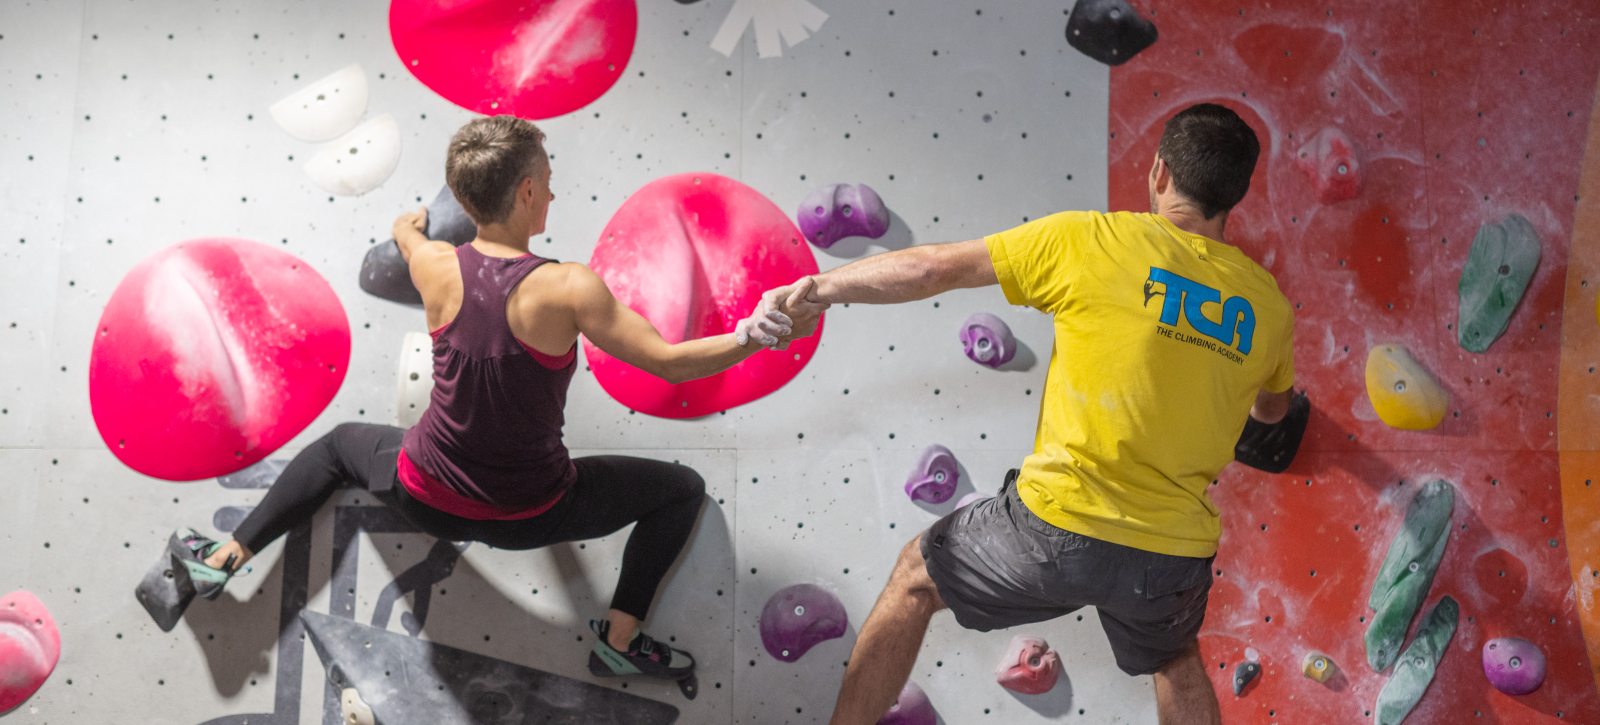 Couple holding hands climbing together on a climbing wall during an active date night in Glasgow.